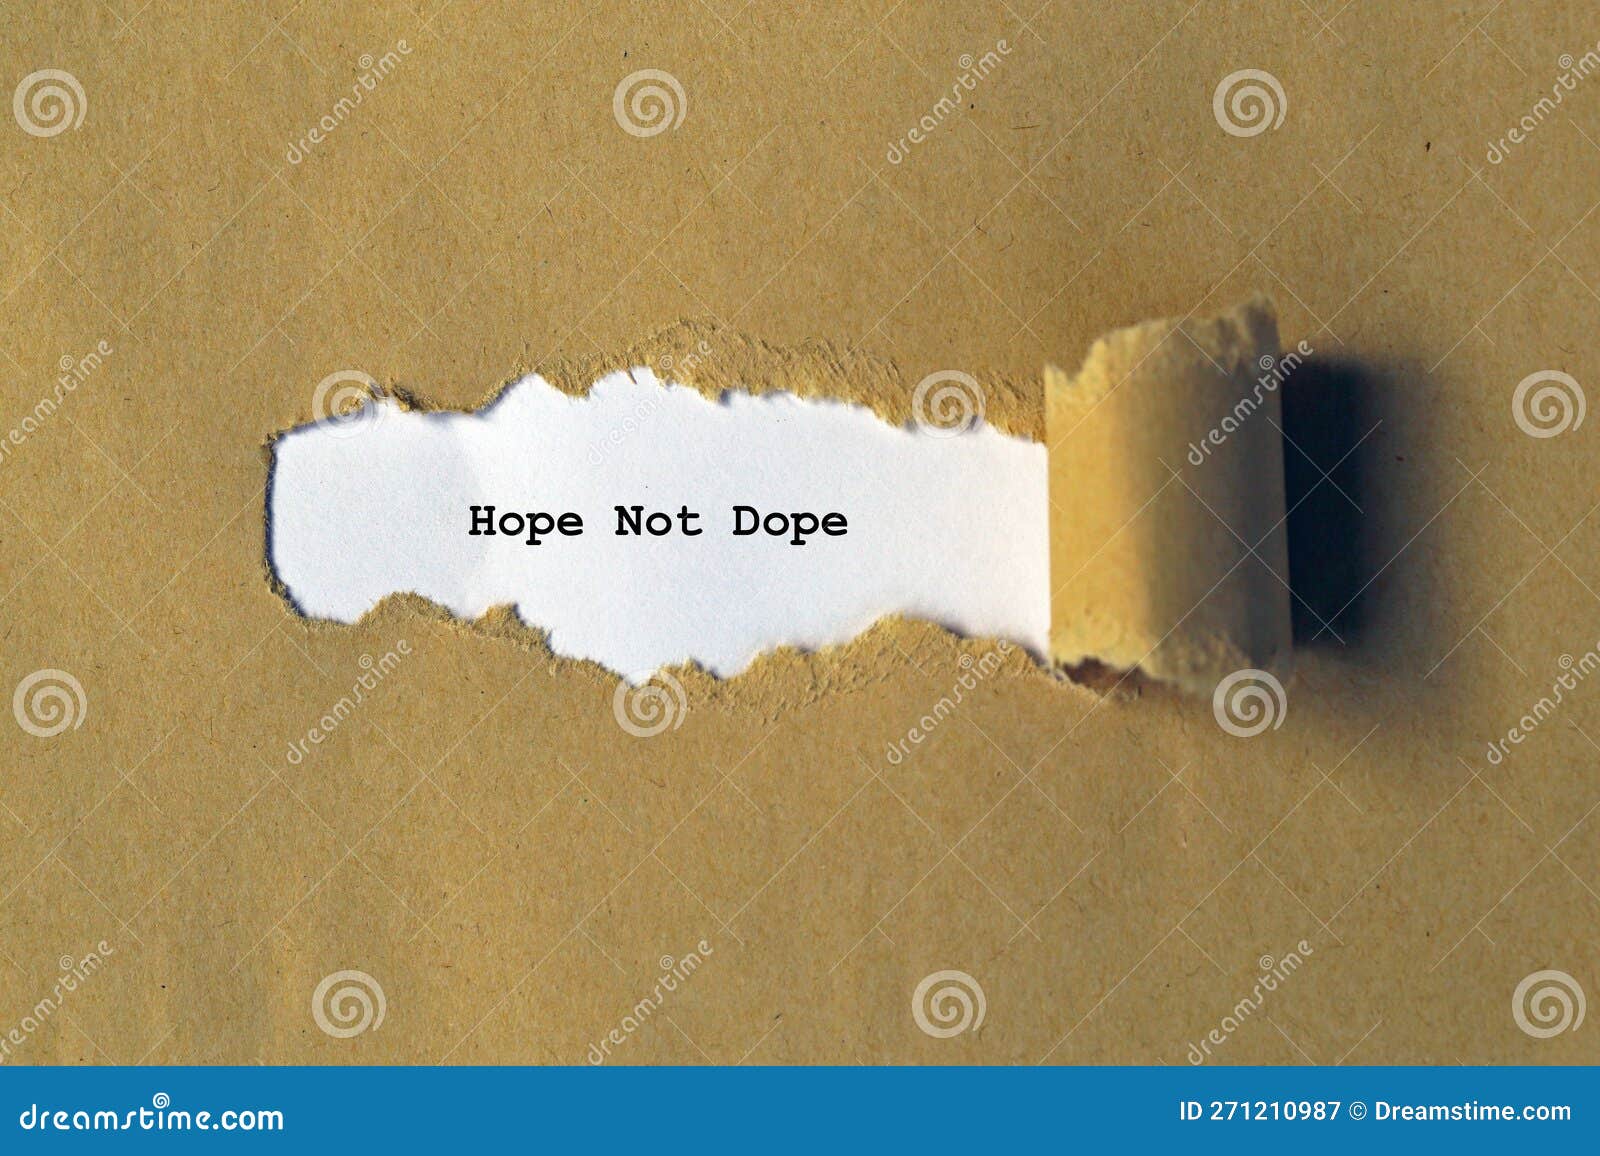 hope not dope on paper